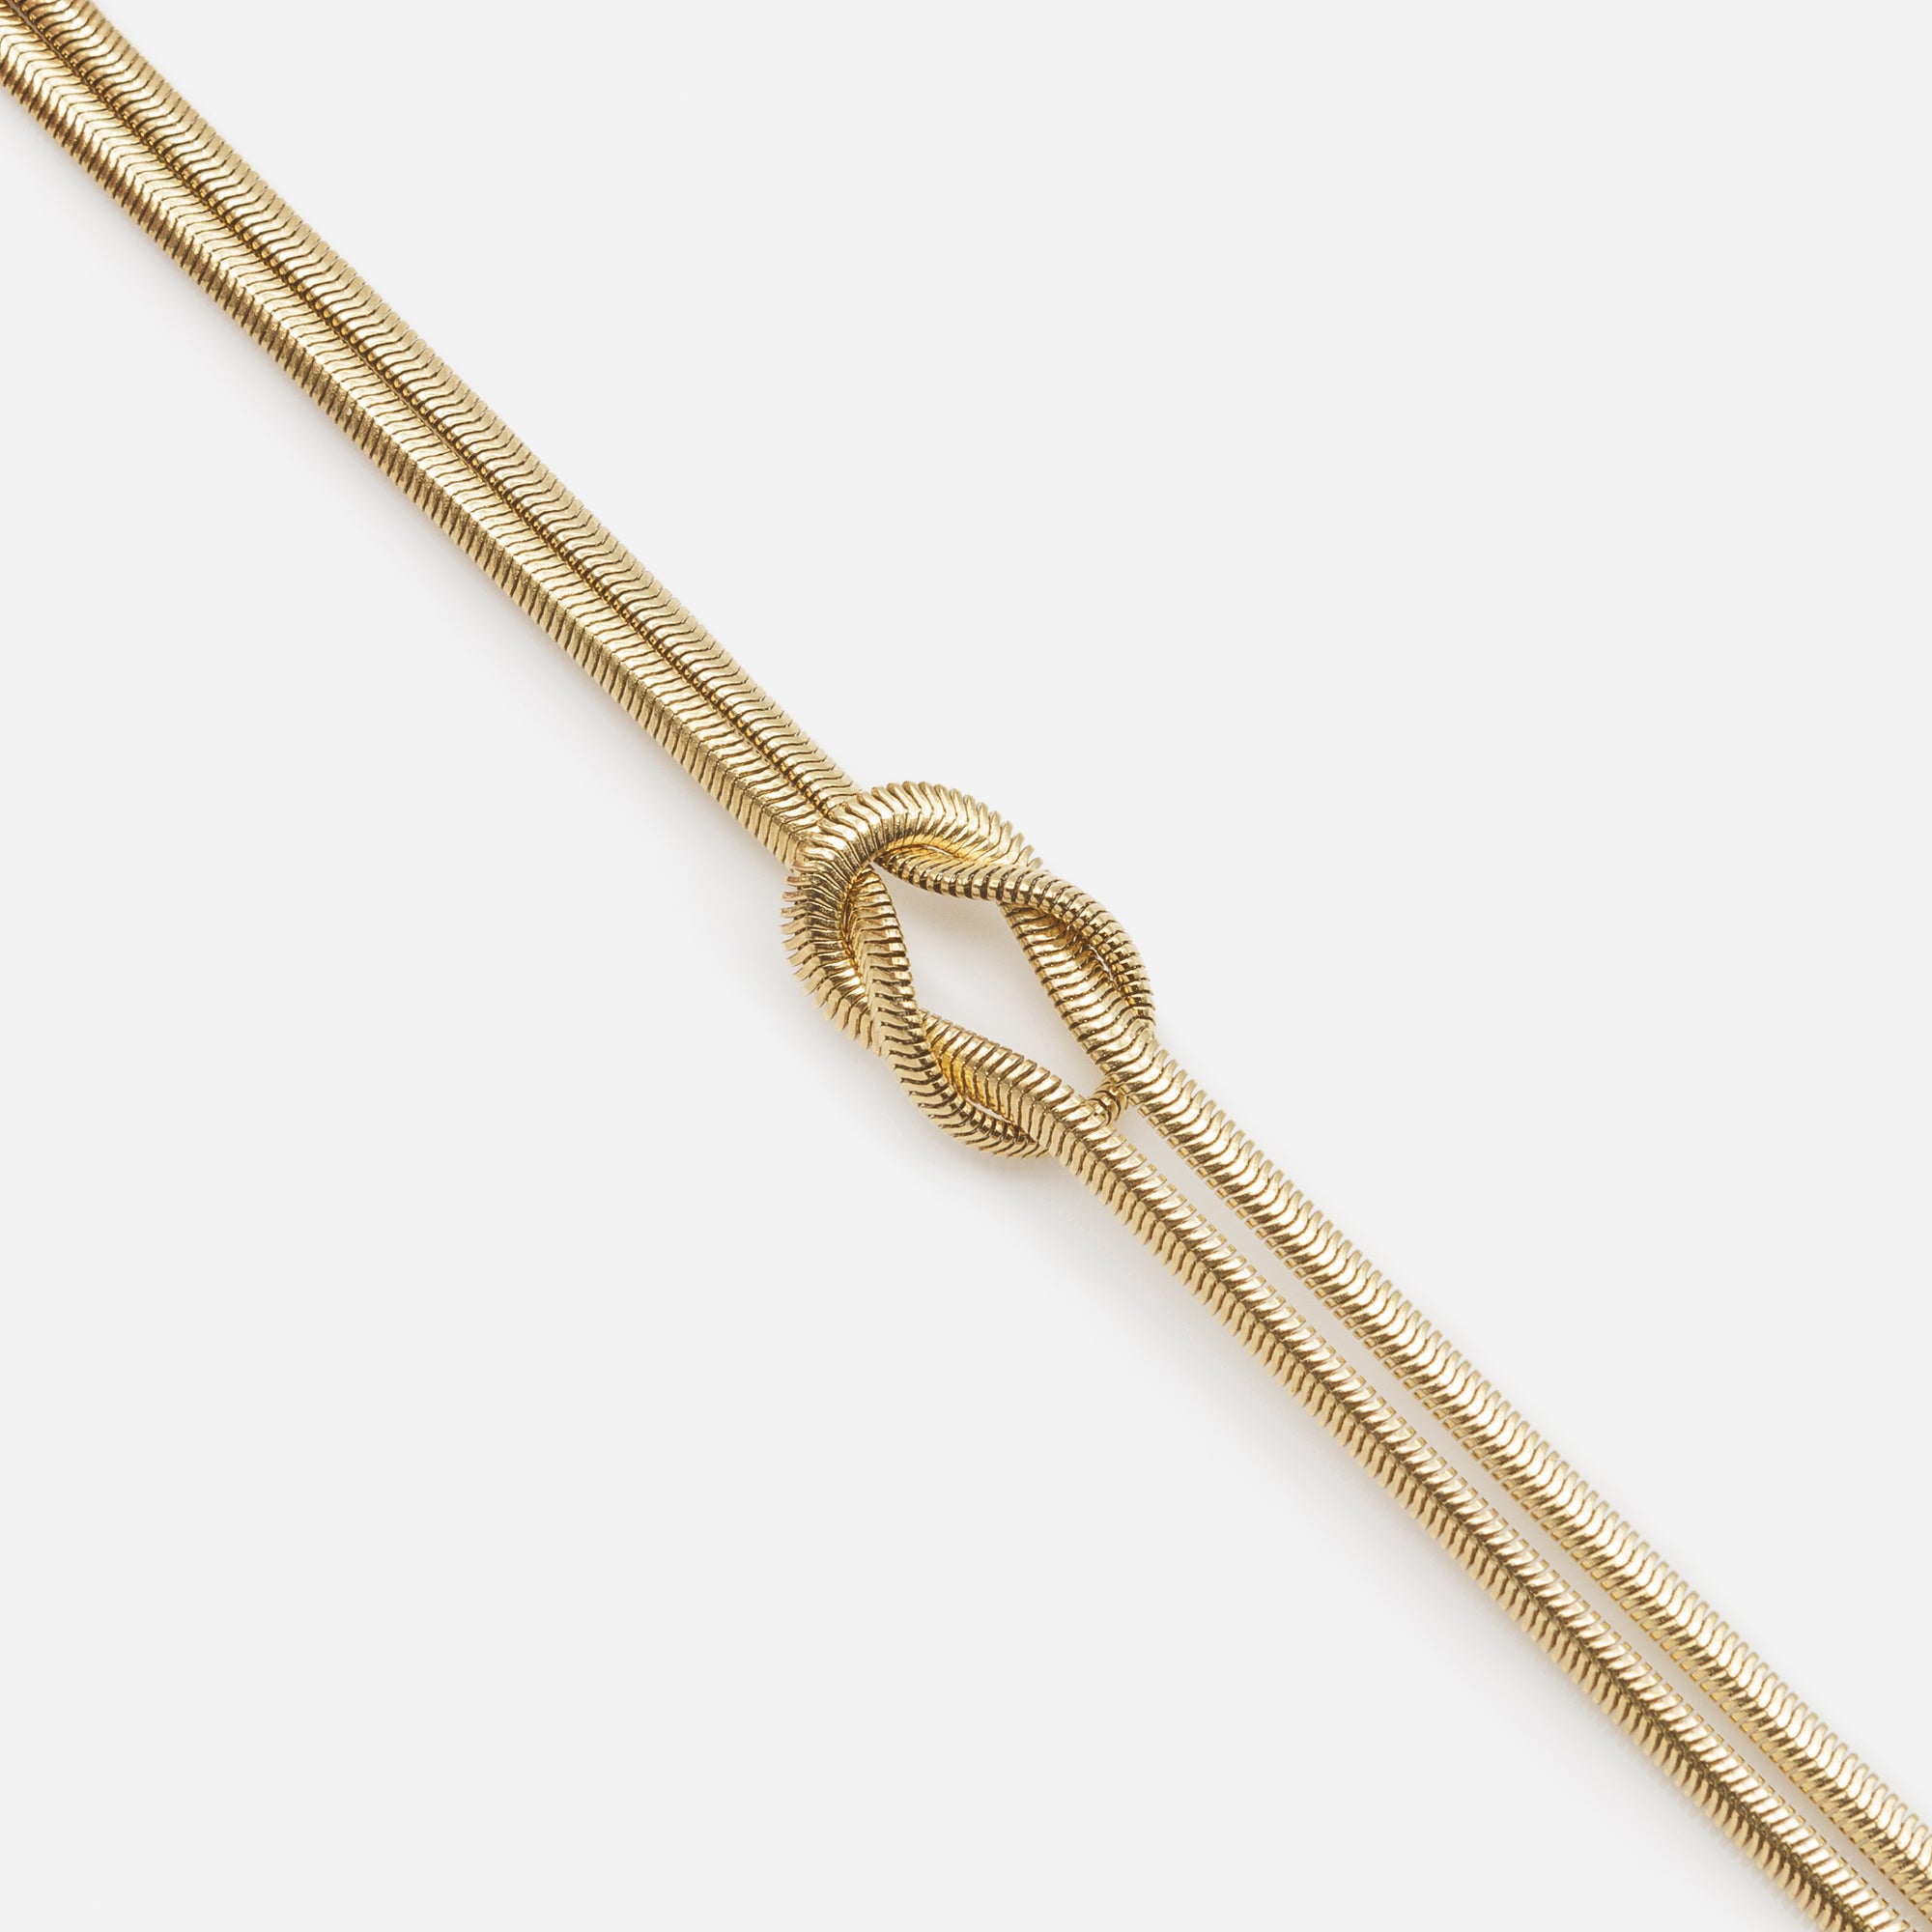 Gold knot bracelet with round serpentine links in stainless steel